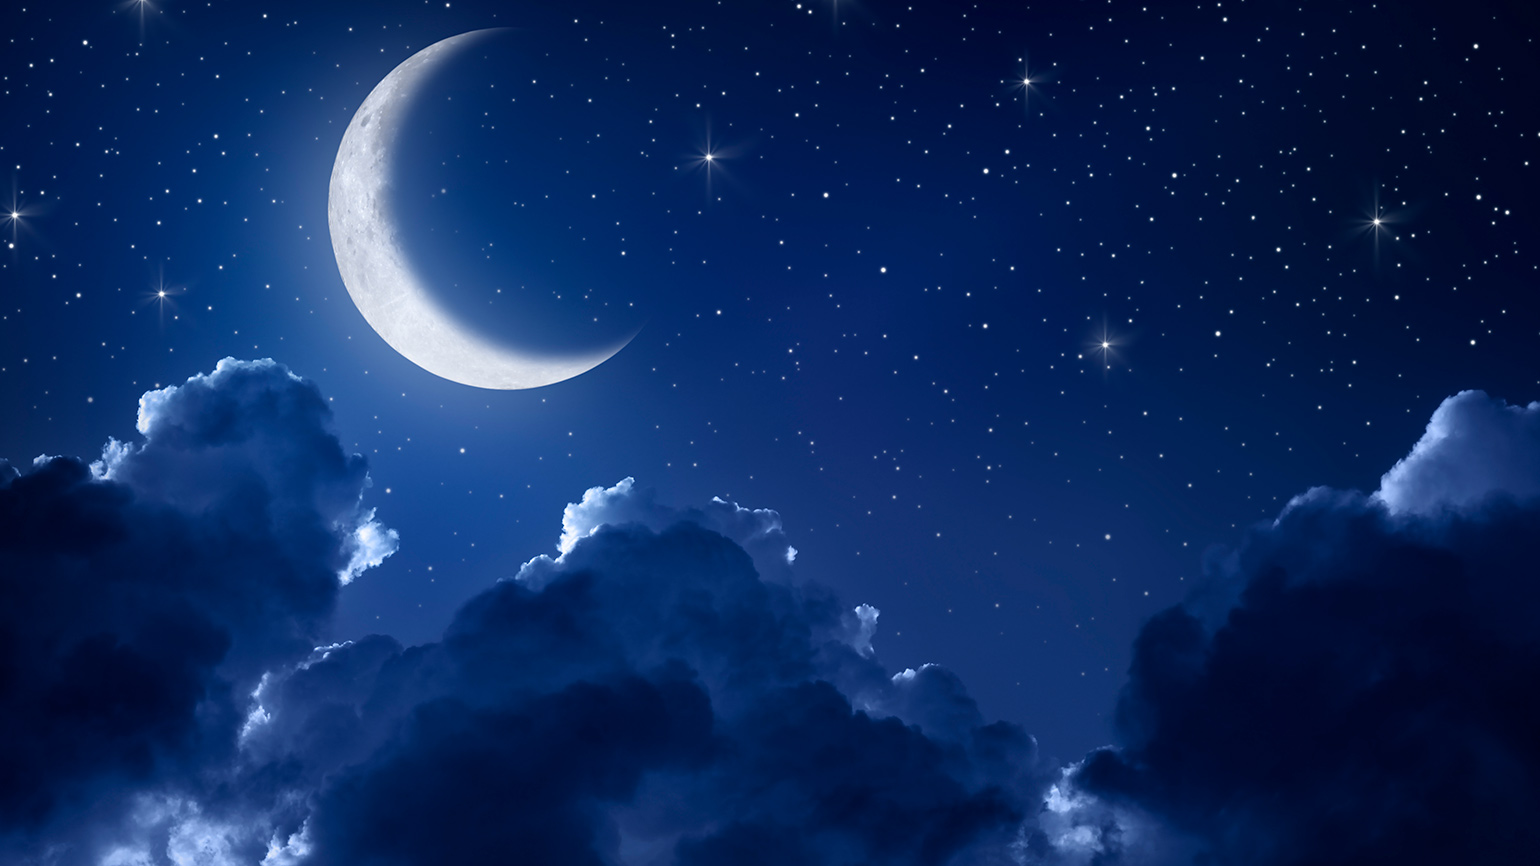 Royalty-Free Stock Photo: Night sky with moon, clouds and sky during sleep meditation.